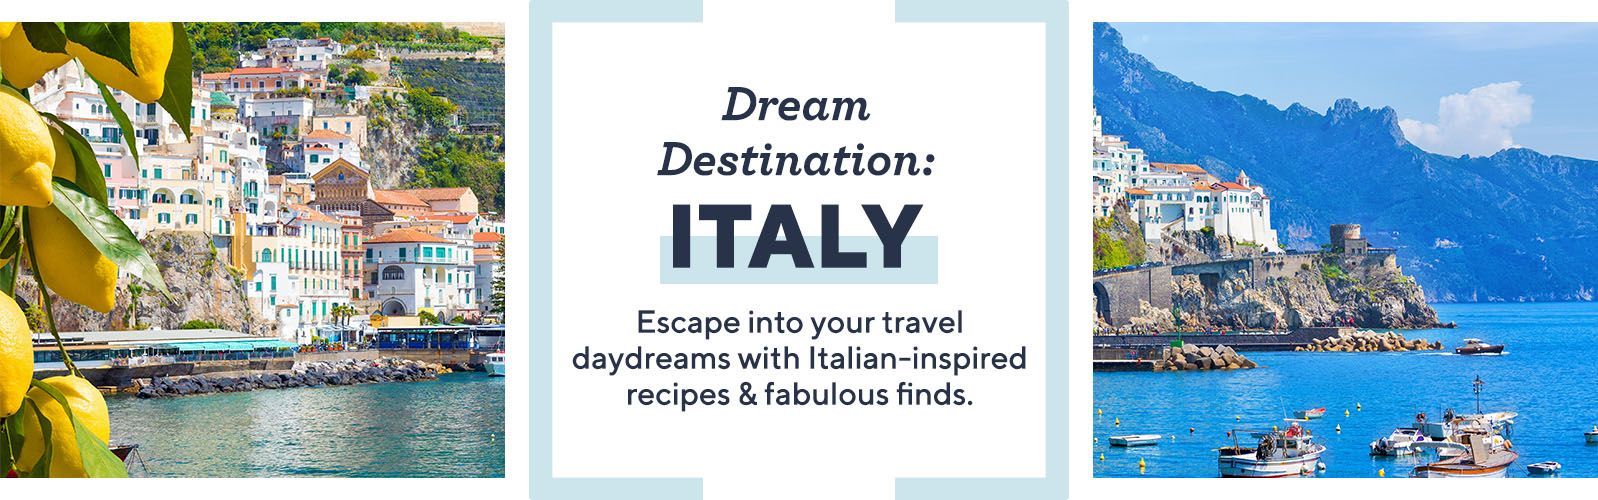 Dream Destination: Italy.  Escape into your travel daydreams with Italian-inspired recipes & fabulous finds